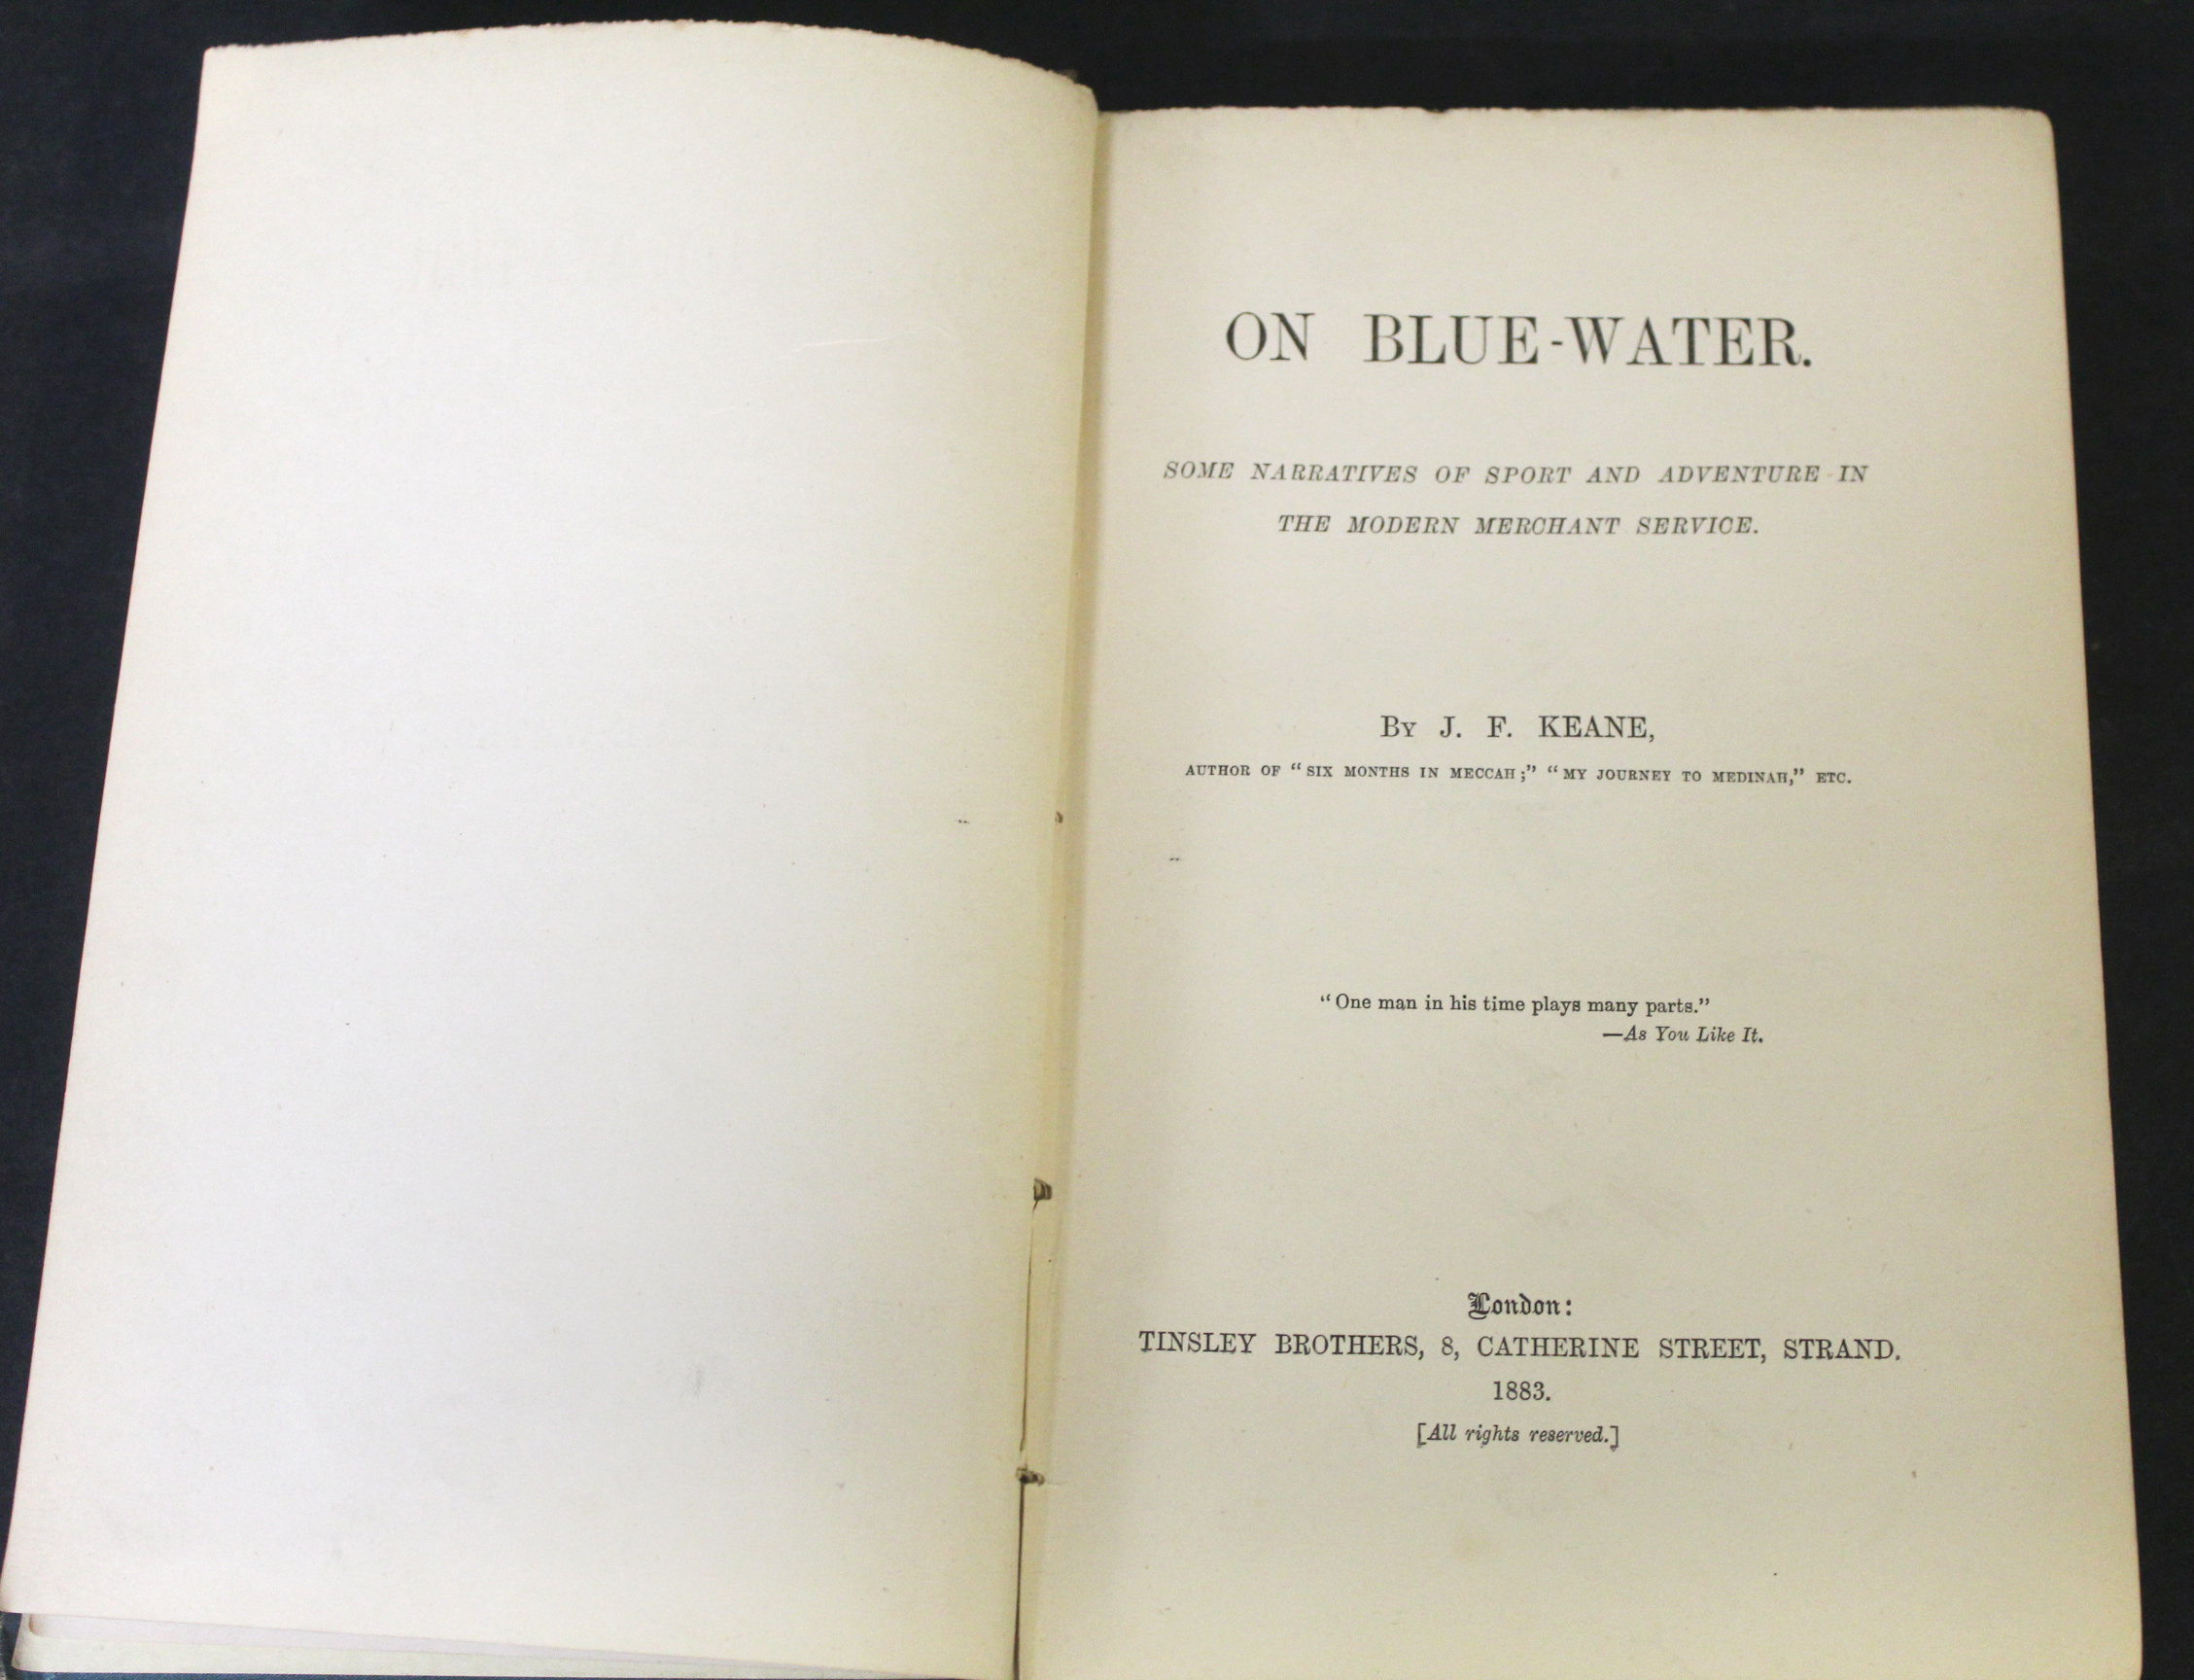 JOHN FRYER KEANE: ON BLUE-WATER, SOME NARRATIVES OF SPORT AND ADVENTURES IN THE MODERN MERCHANT